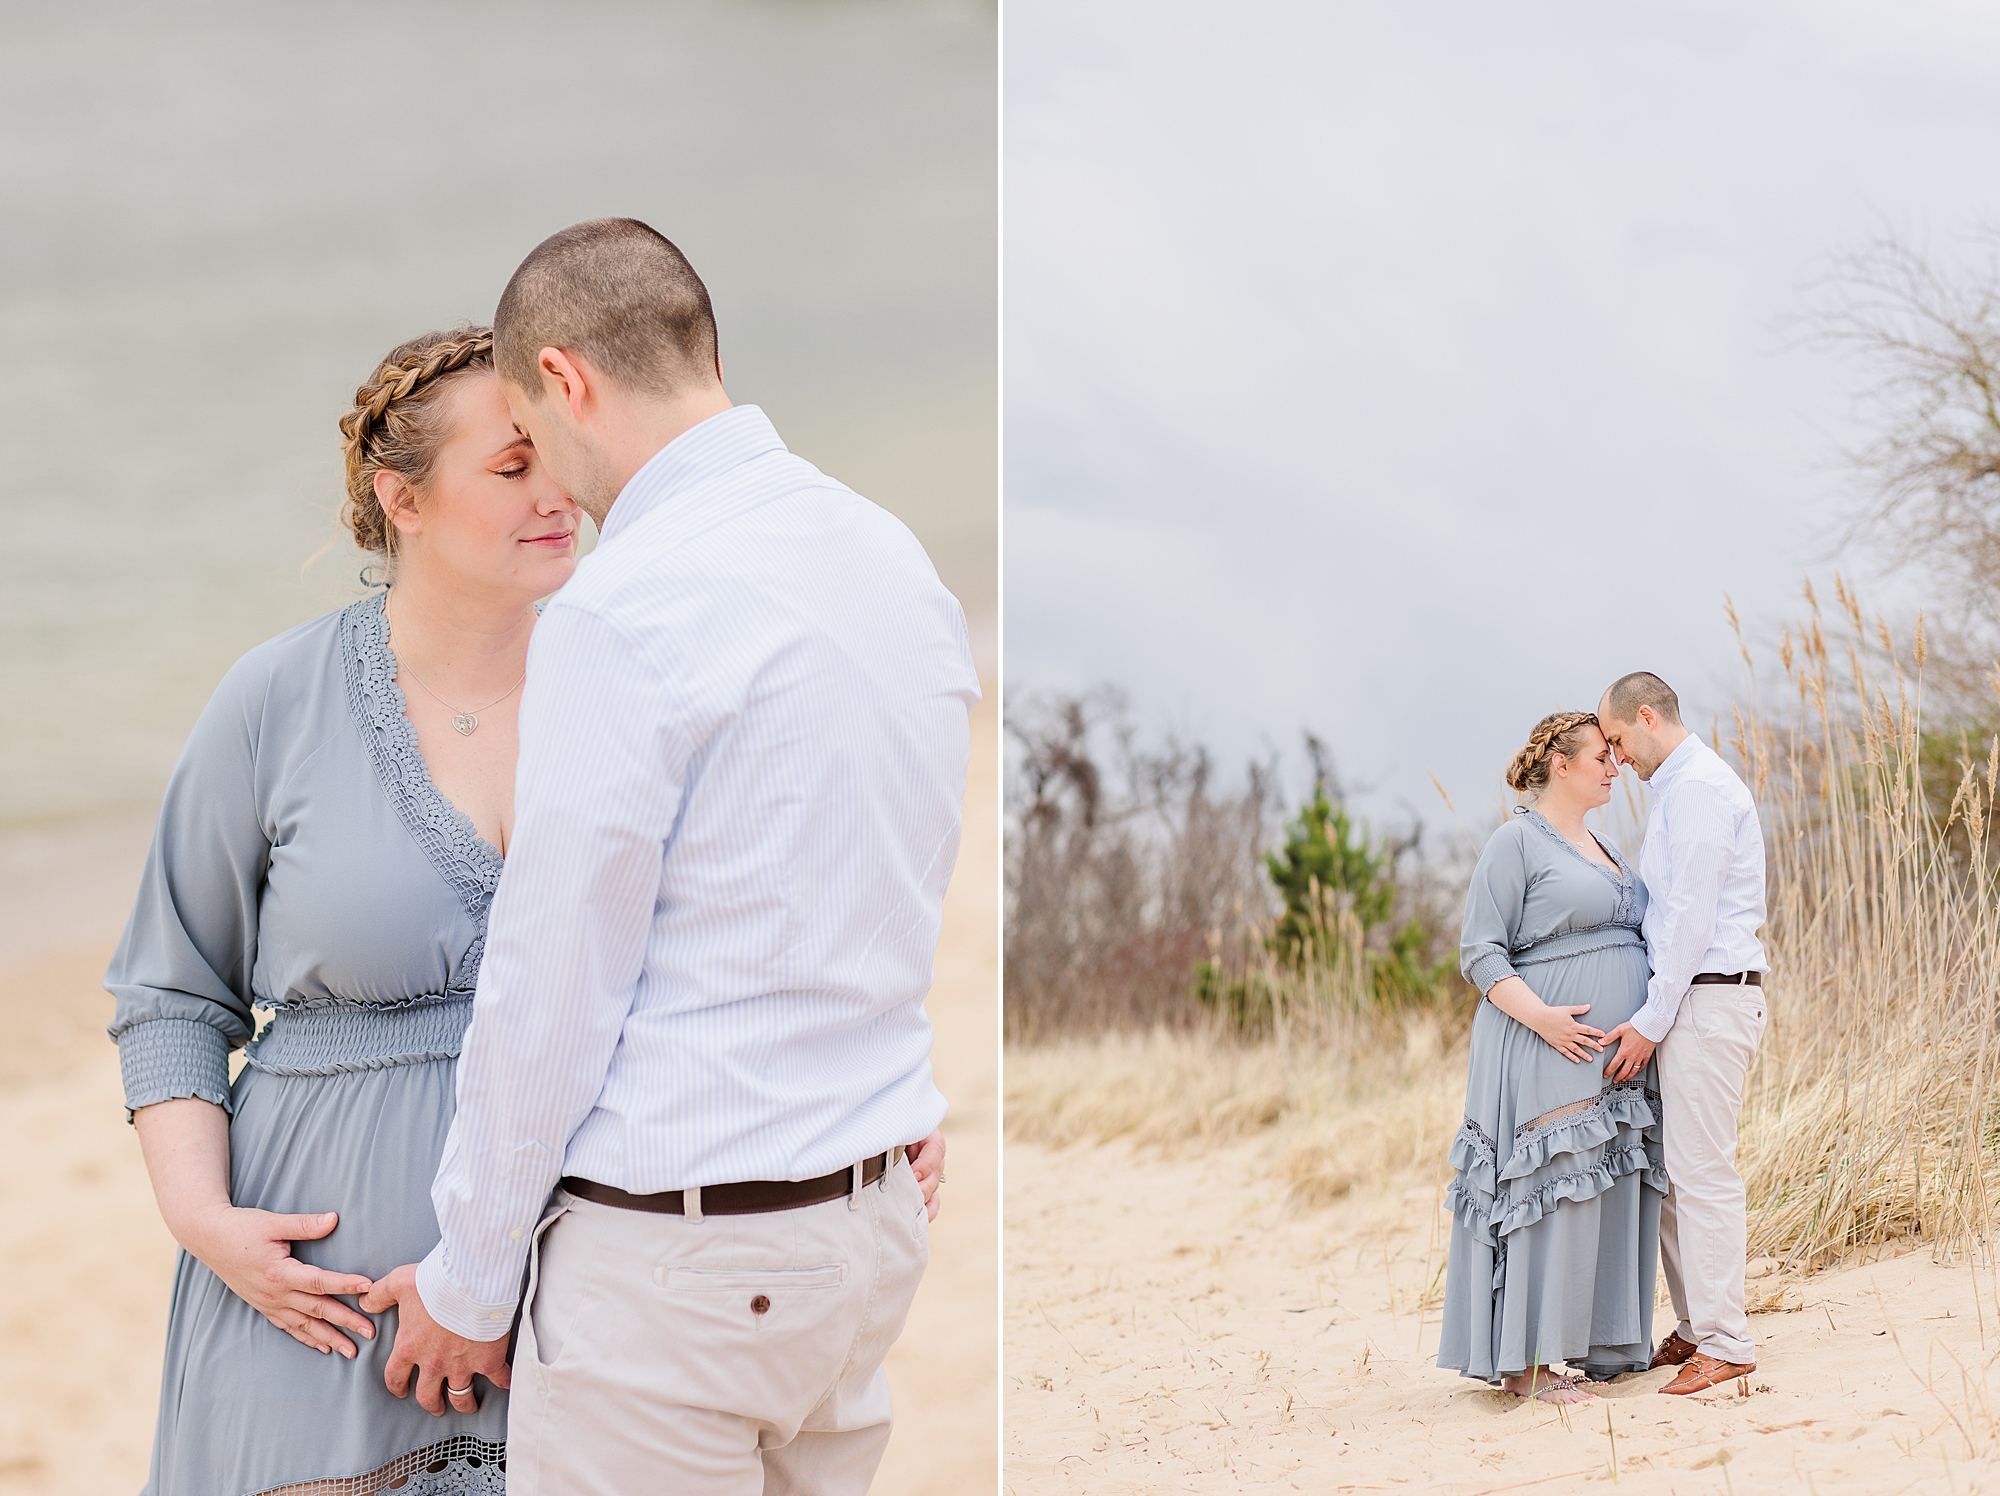 Eastern Shore maternity portraits while storm rolls in